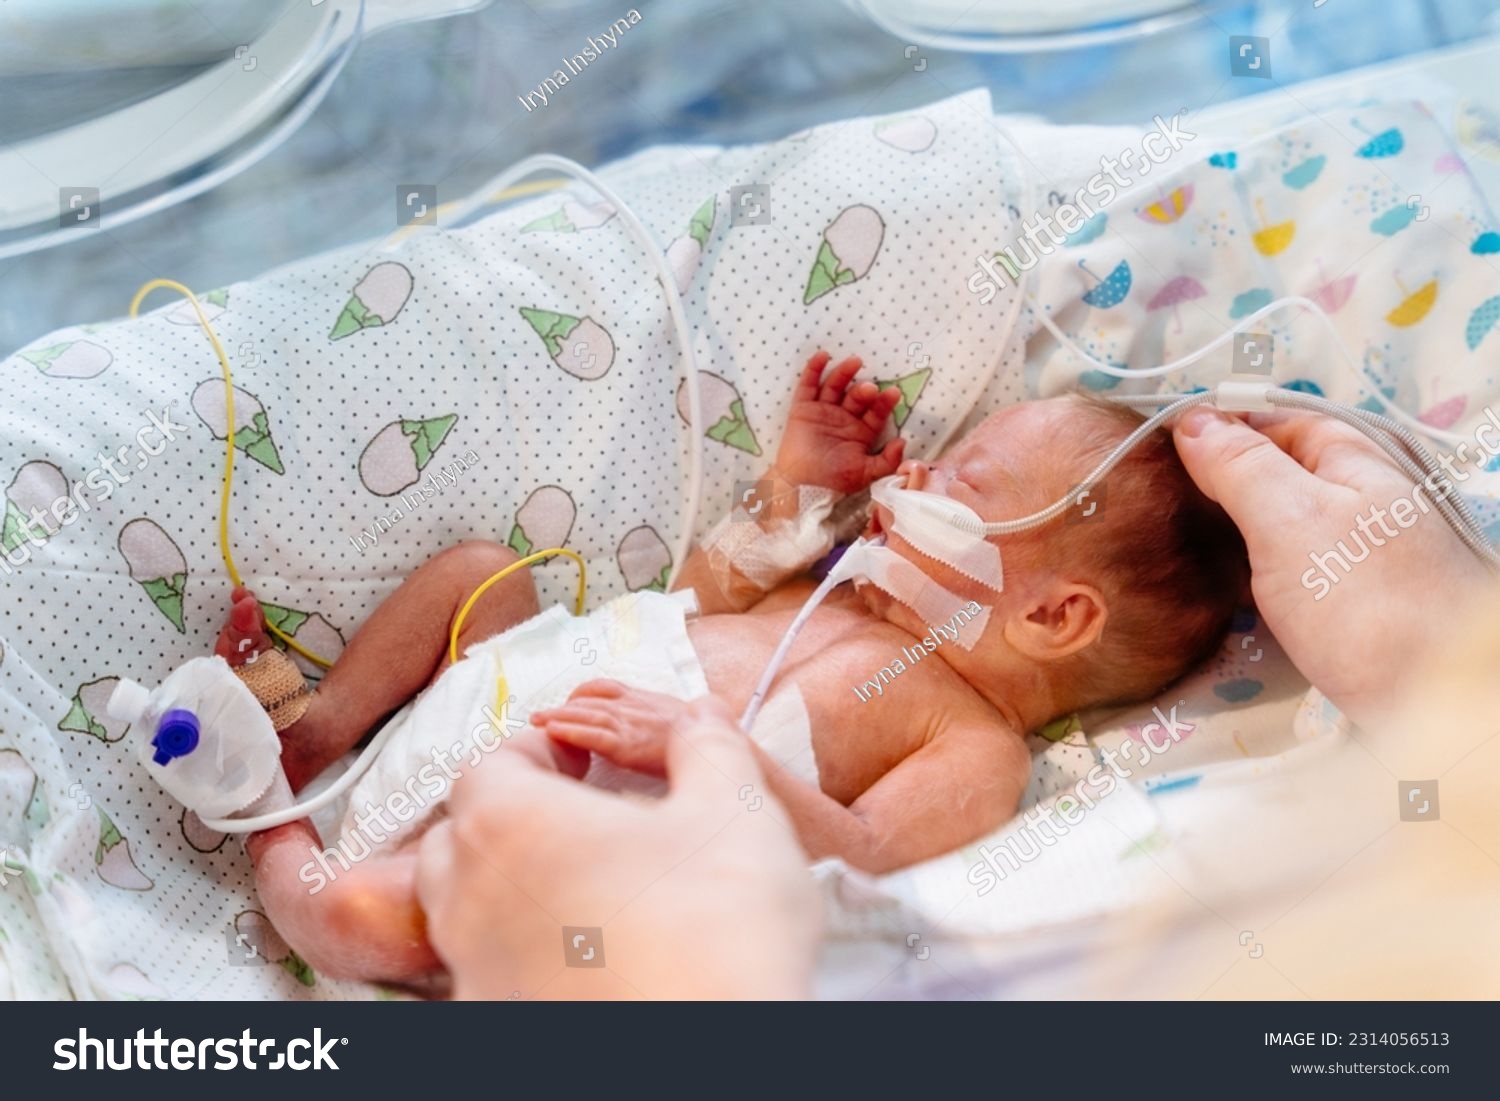 Close up of mother's hands holding new born baby born at 32 weeks gestation in intensive care unit in a medical incubator. #2314056513